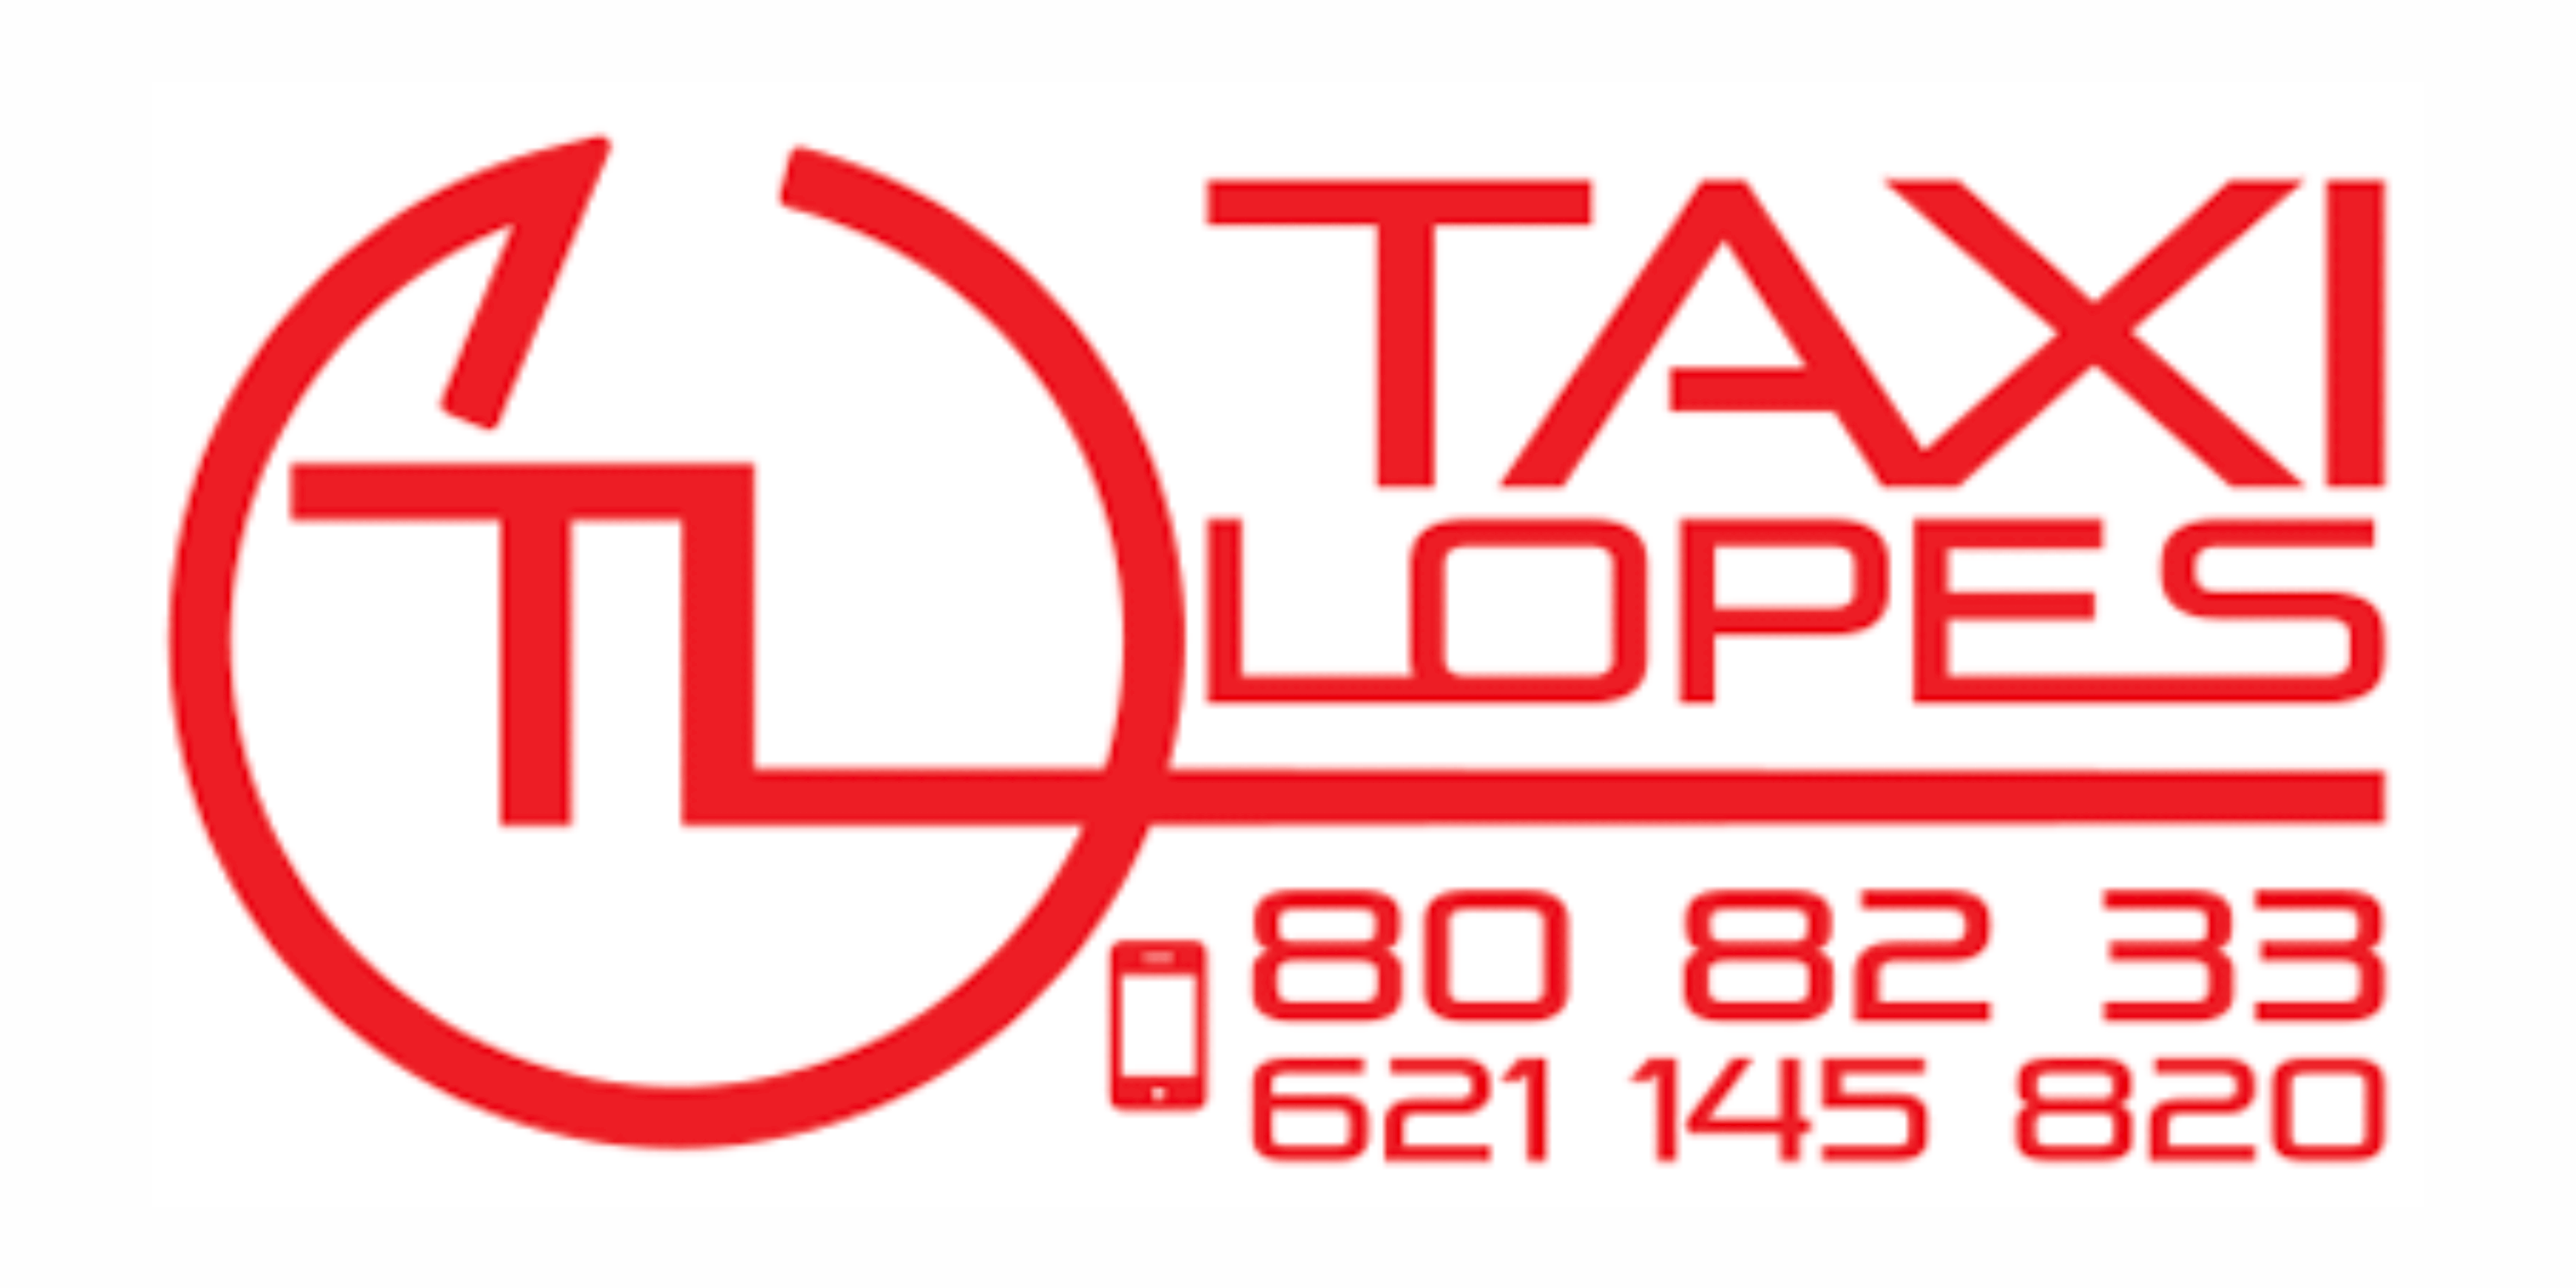 Taxi Lopes